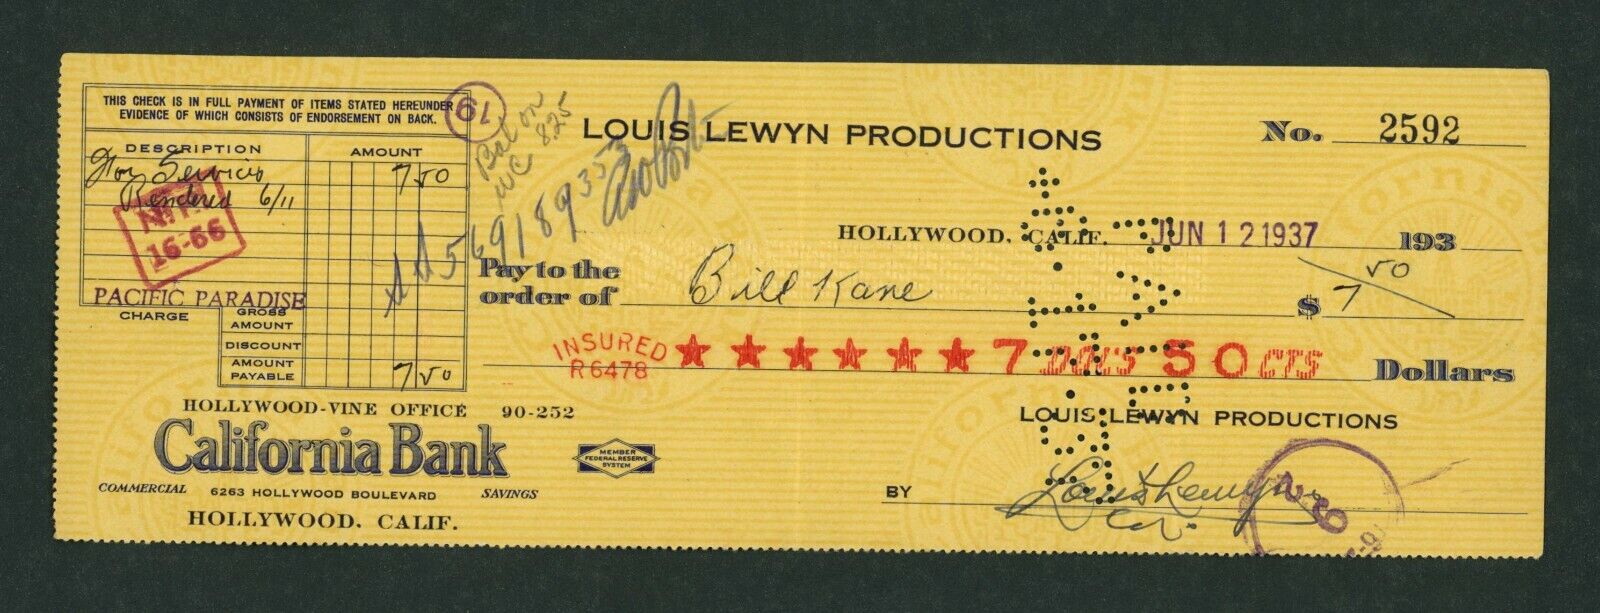 Louis Lewyn - Signed/Autographed Personal Check  (1937)